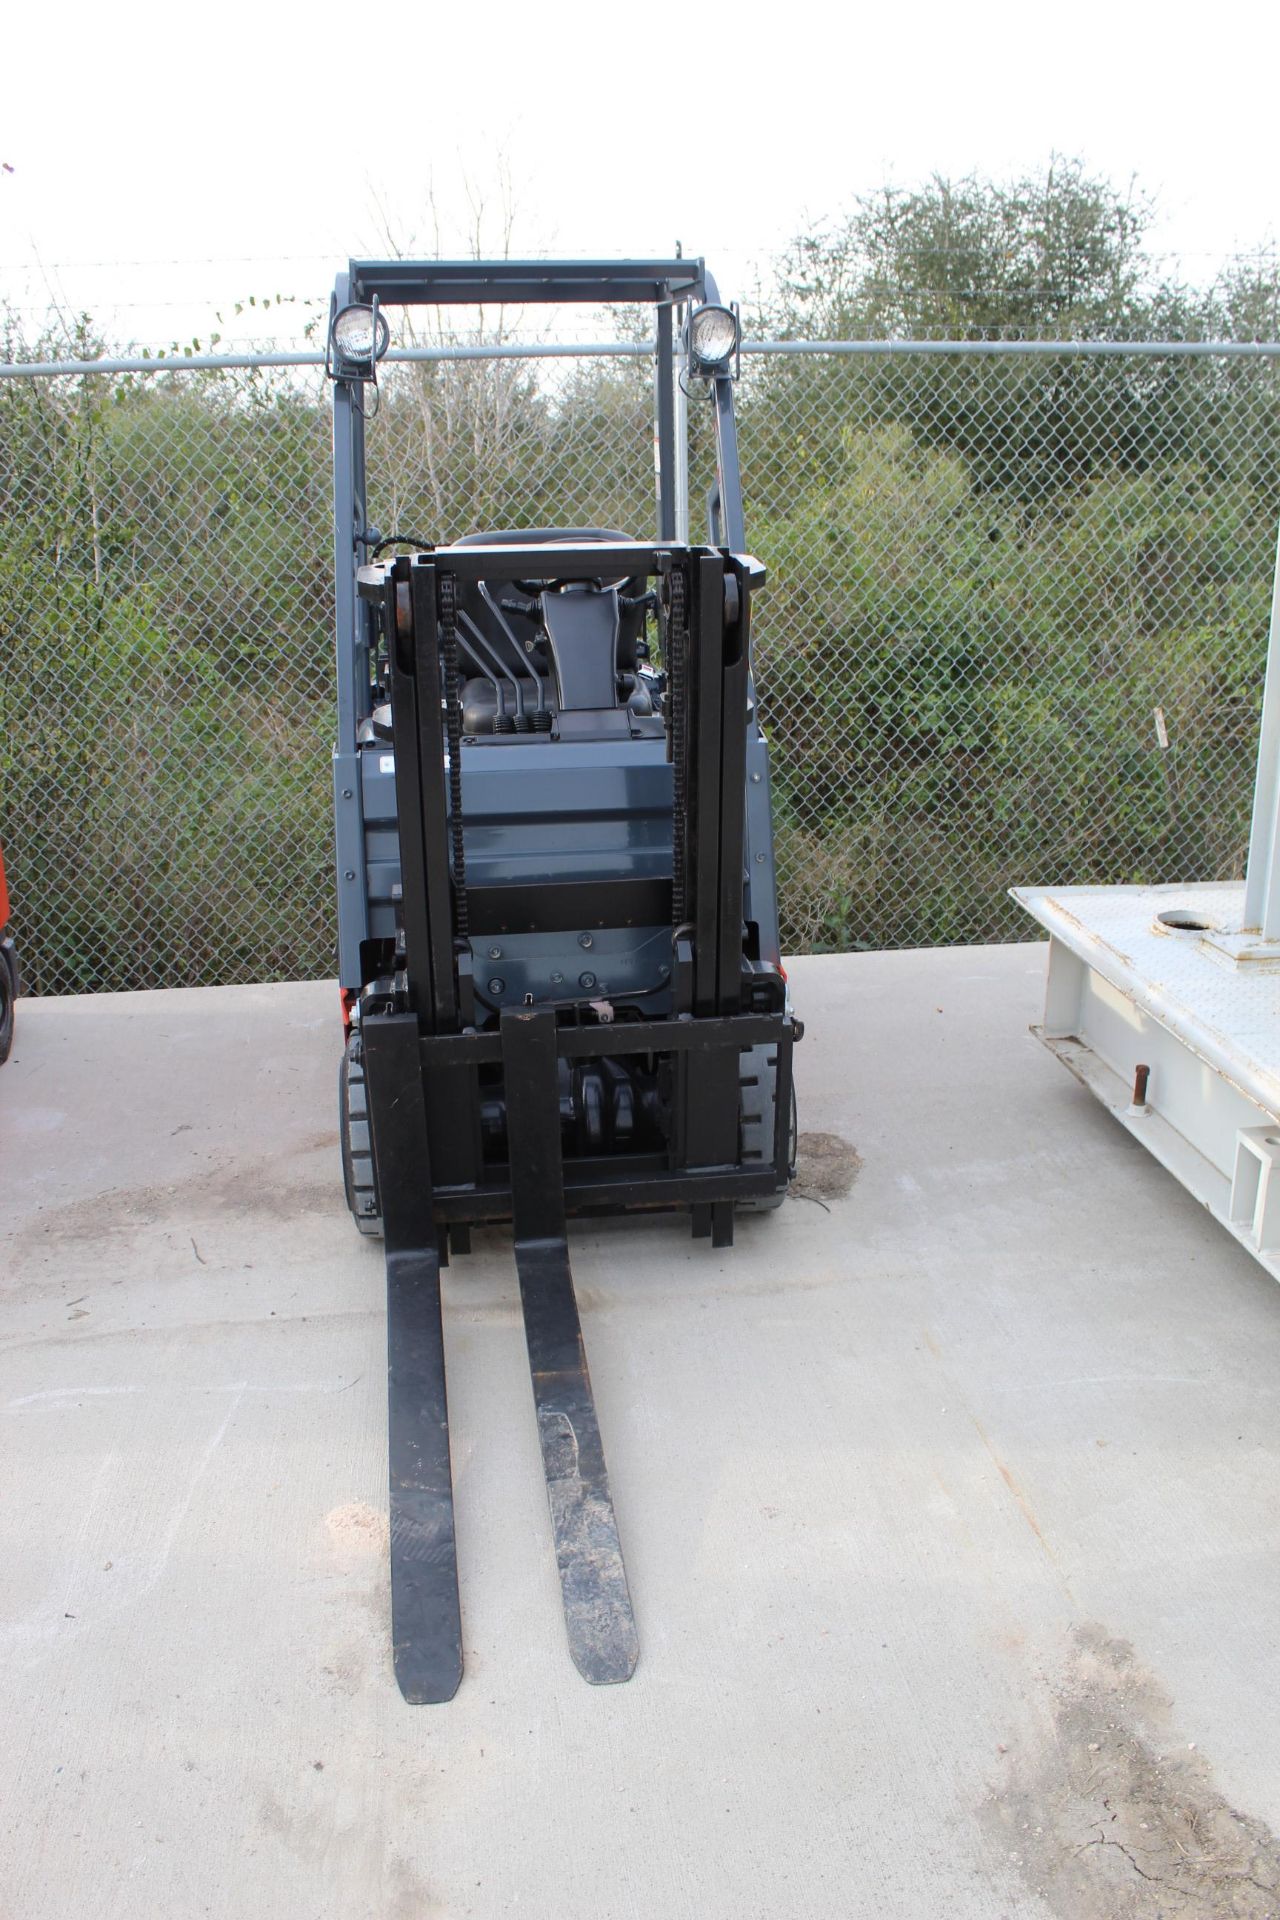 FORKLIFT, TOYOTA 3,000 LB. CAP. MDL. 8FGCU15, new 2013, LPG pwrd., 80" lift ht., 2-stage space saver - Image 2 of 4